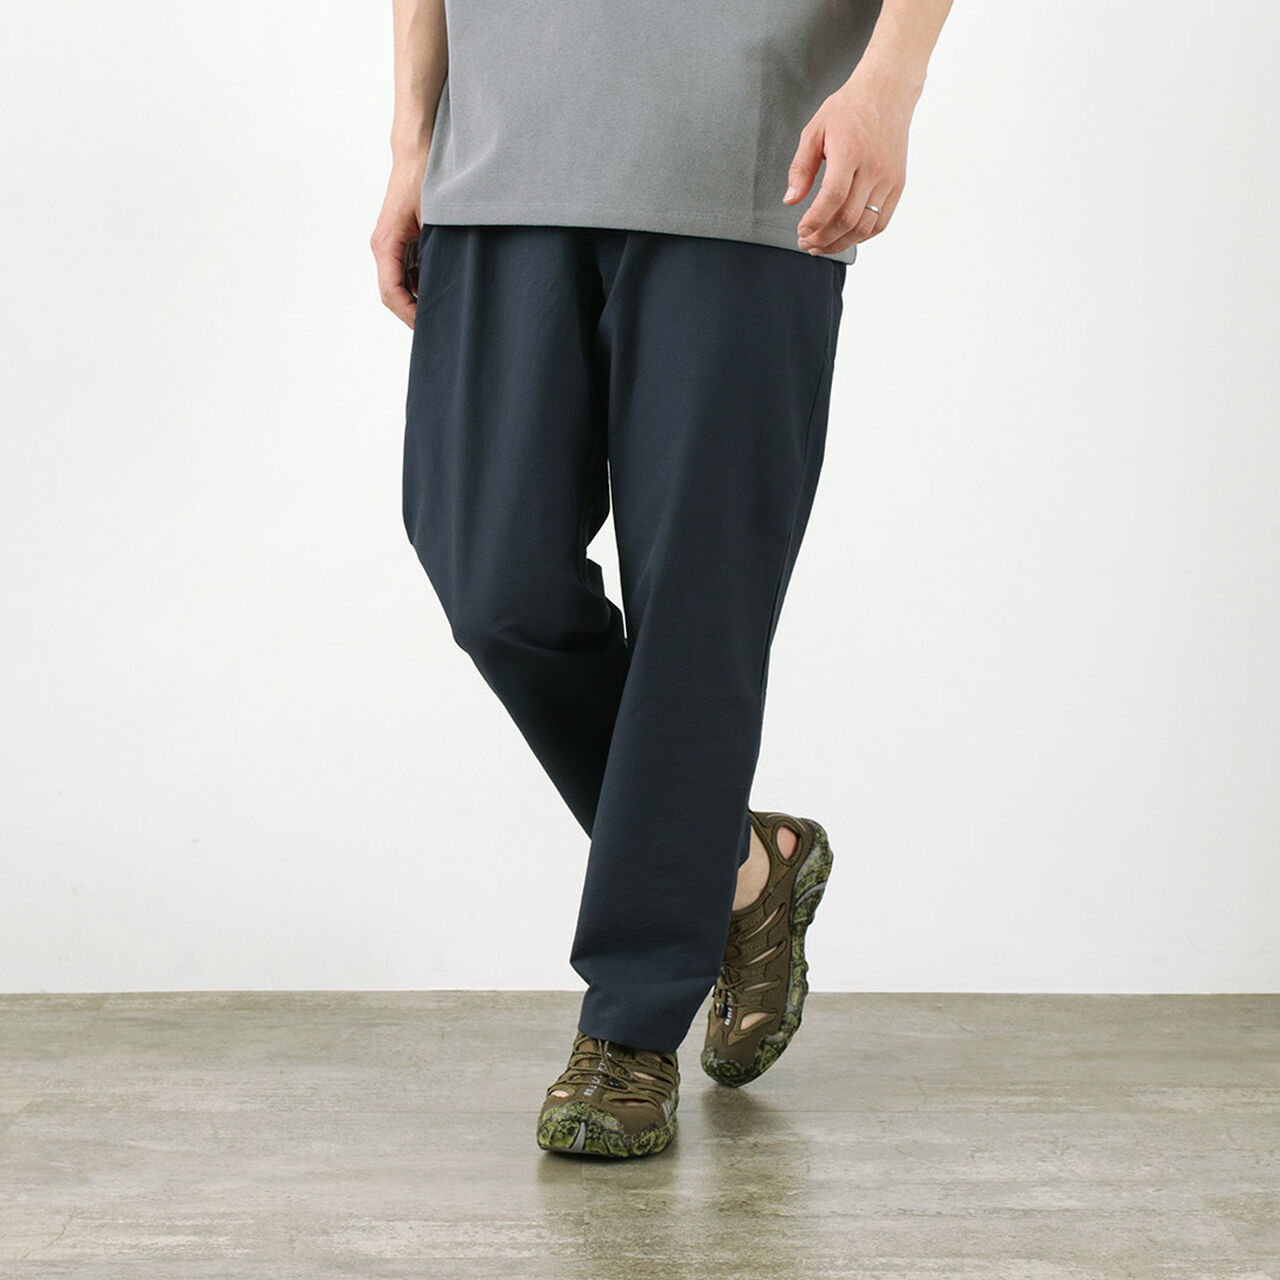 Dot Air baggy top trousers,AzuriteNavy, large image number 0